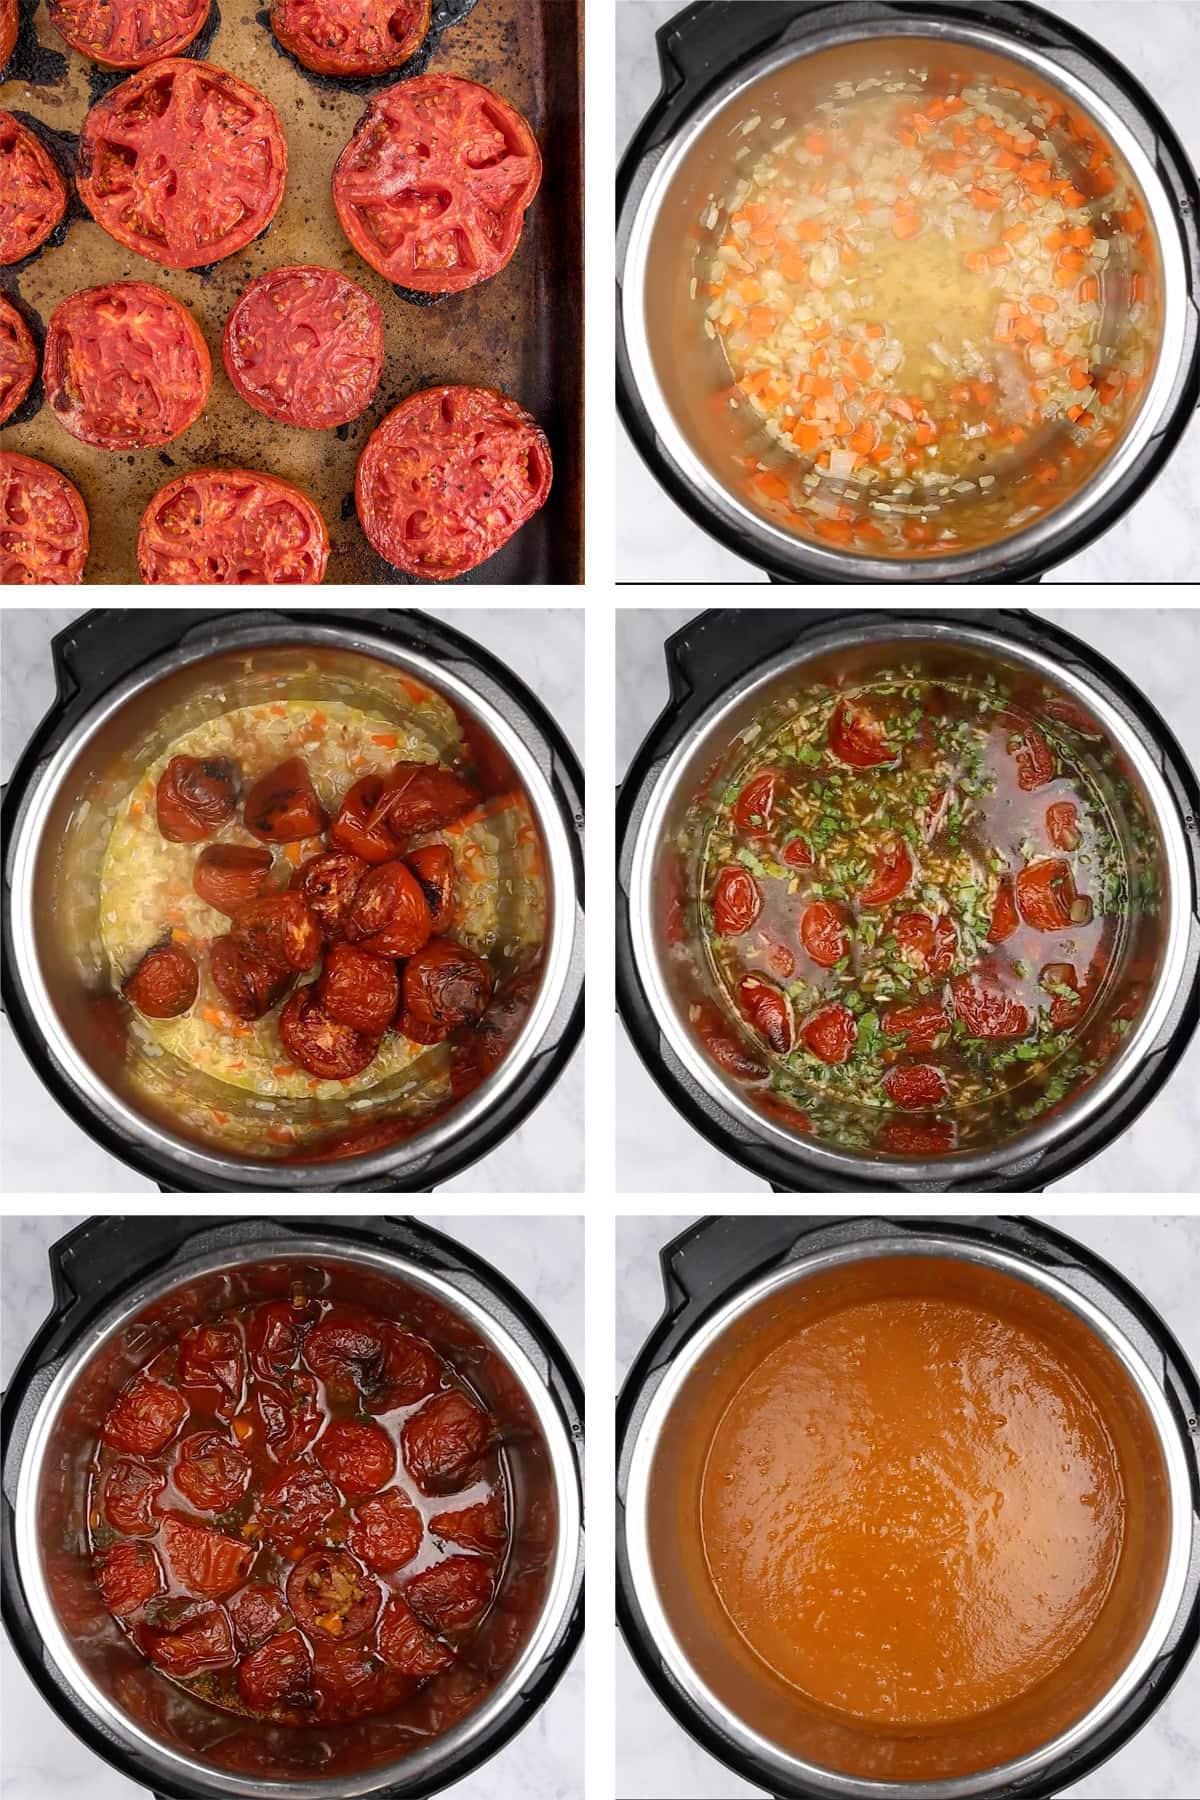 Collage of 6 images depicting the steps for making tomato soup in an instant pot.